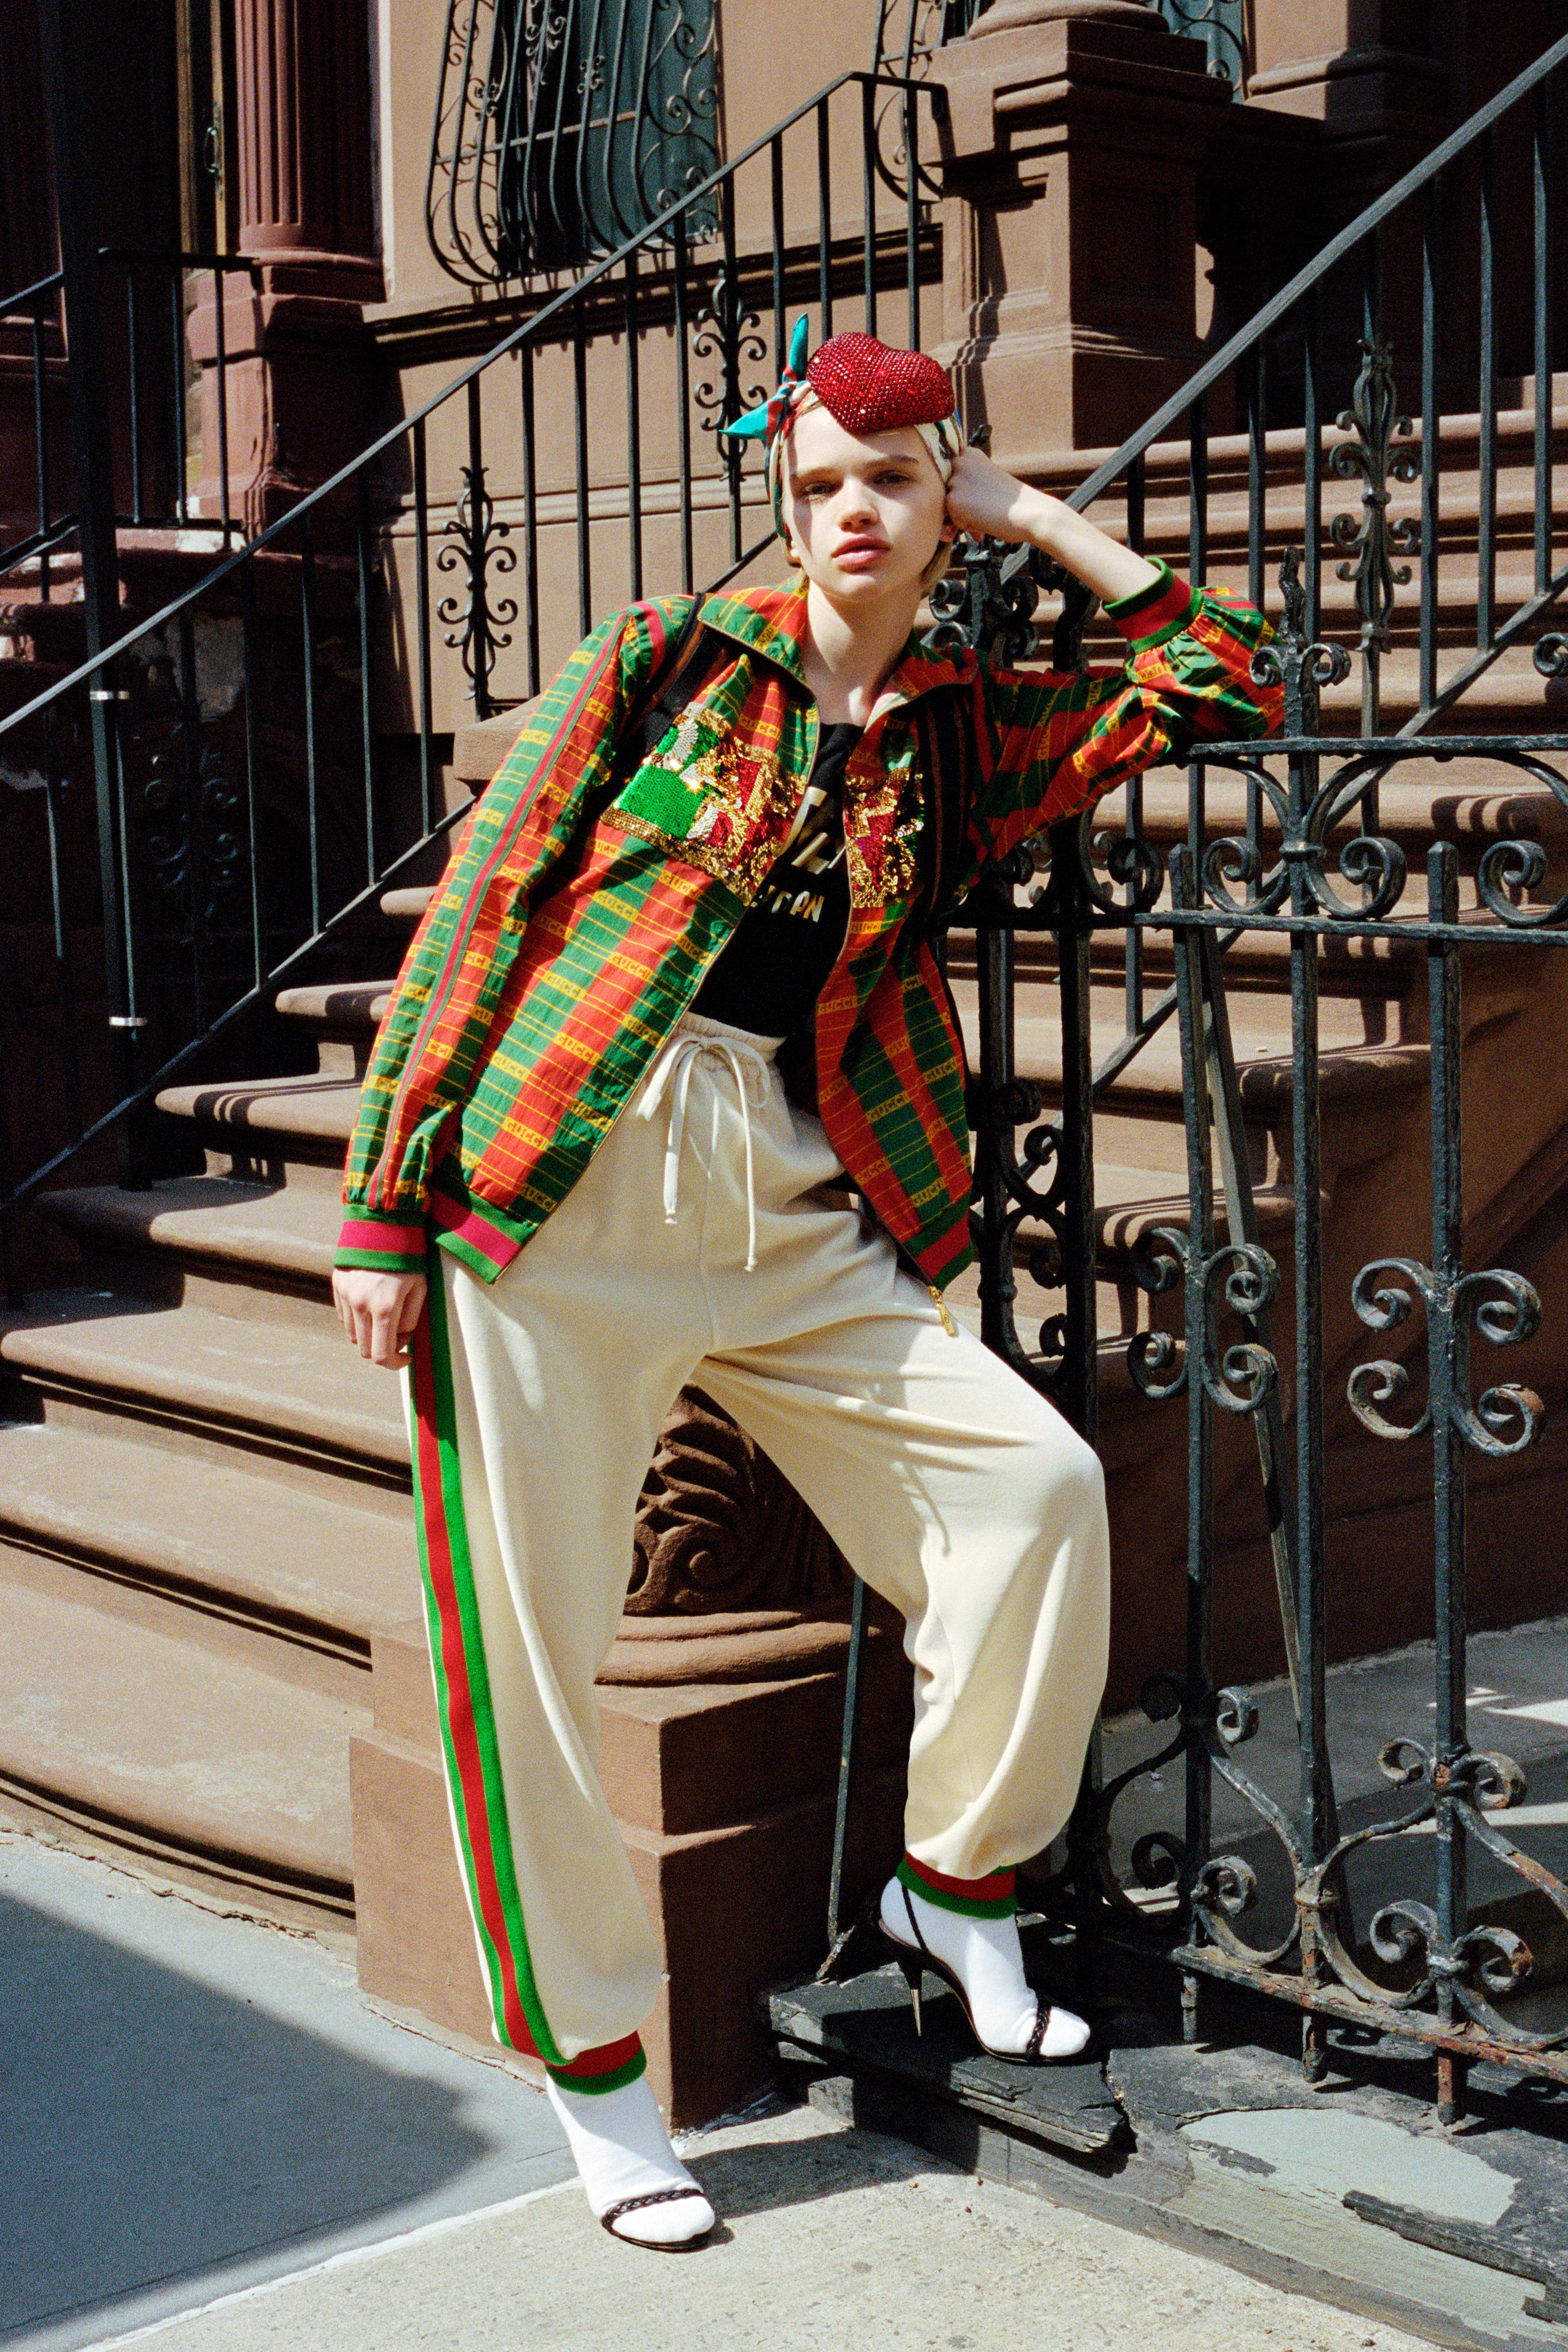 Gucci and Dapper Dan's First Collection Is Here and It's Really